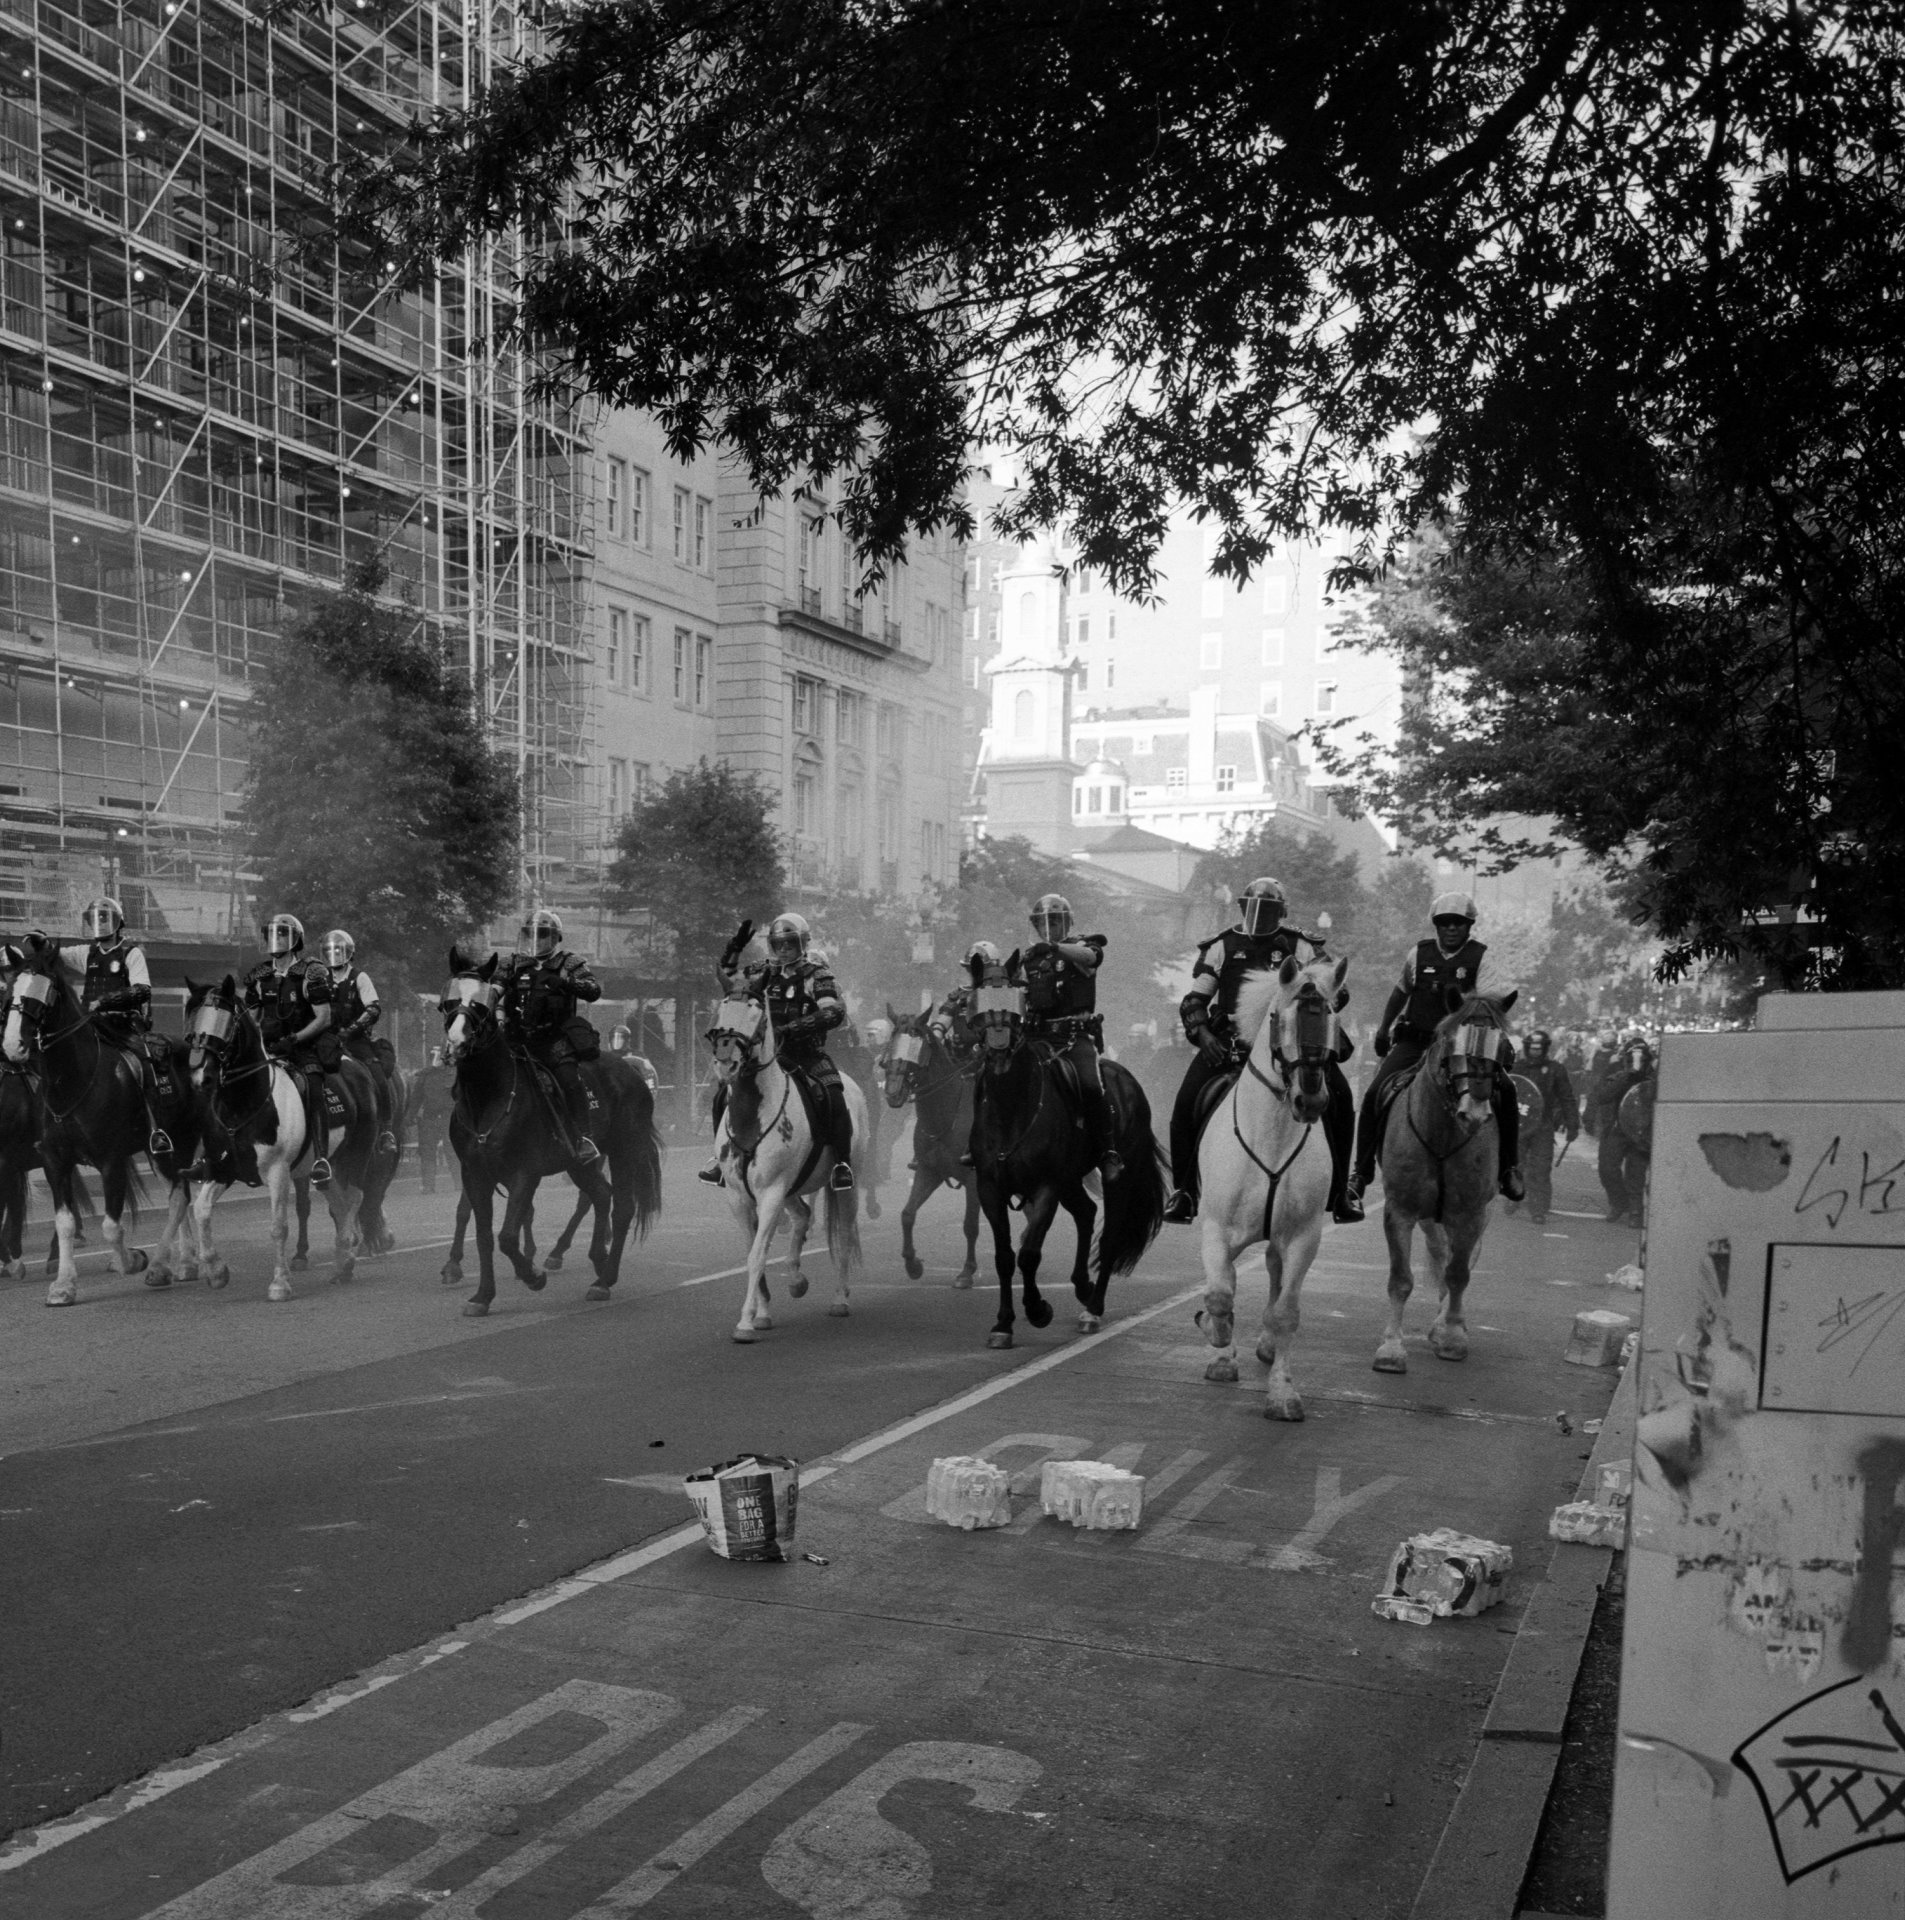 Mounted riot police clear mostly peaceful protesters from H Street near Lafayette Park, Washington DC, USA, before President Trump walked across the road to St. John&rsquo;s Church for a photo opportunity. The historic building was damaged a day earlier in a fire set during protests over the death of George Floyd, a 46-year-old Black man who was killed by a police officer while being arrested in Minneapolis on 25 May 2020.